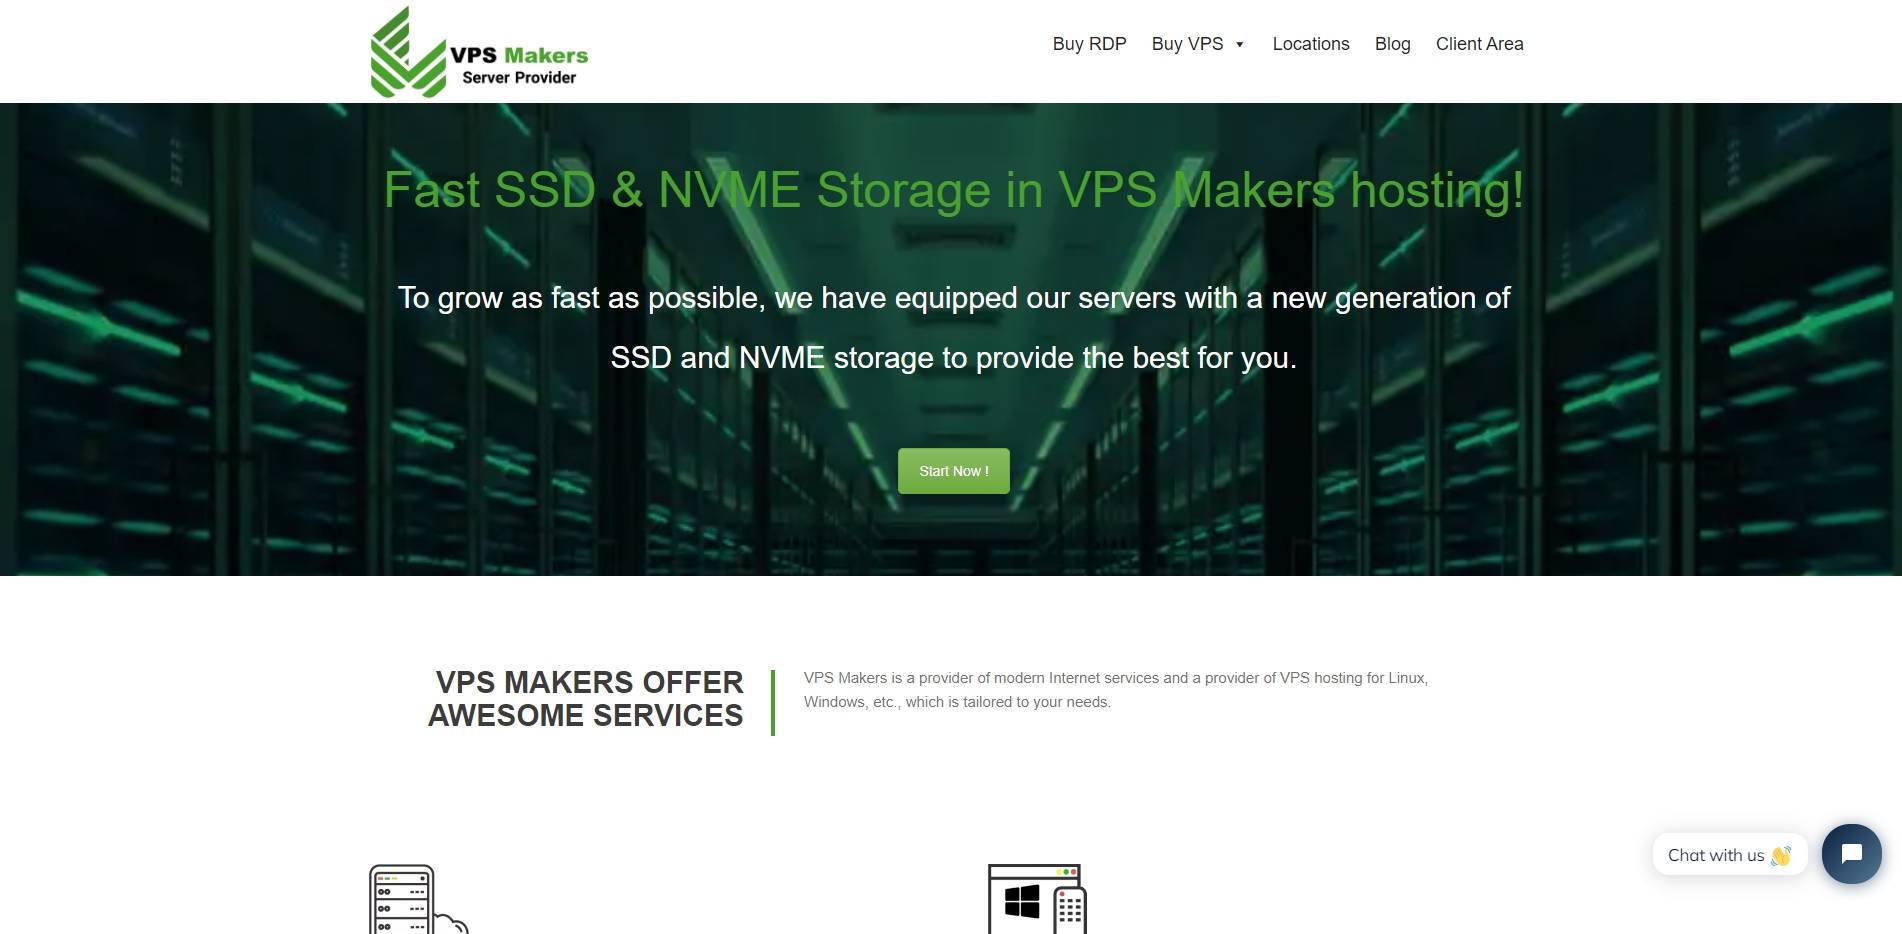 VPS Makers